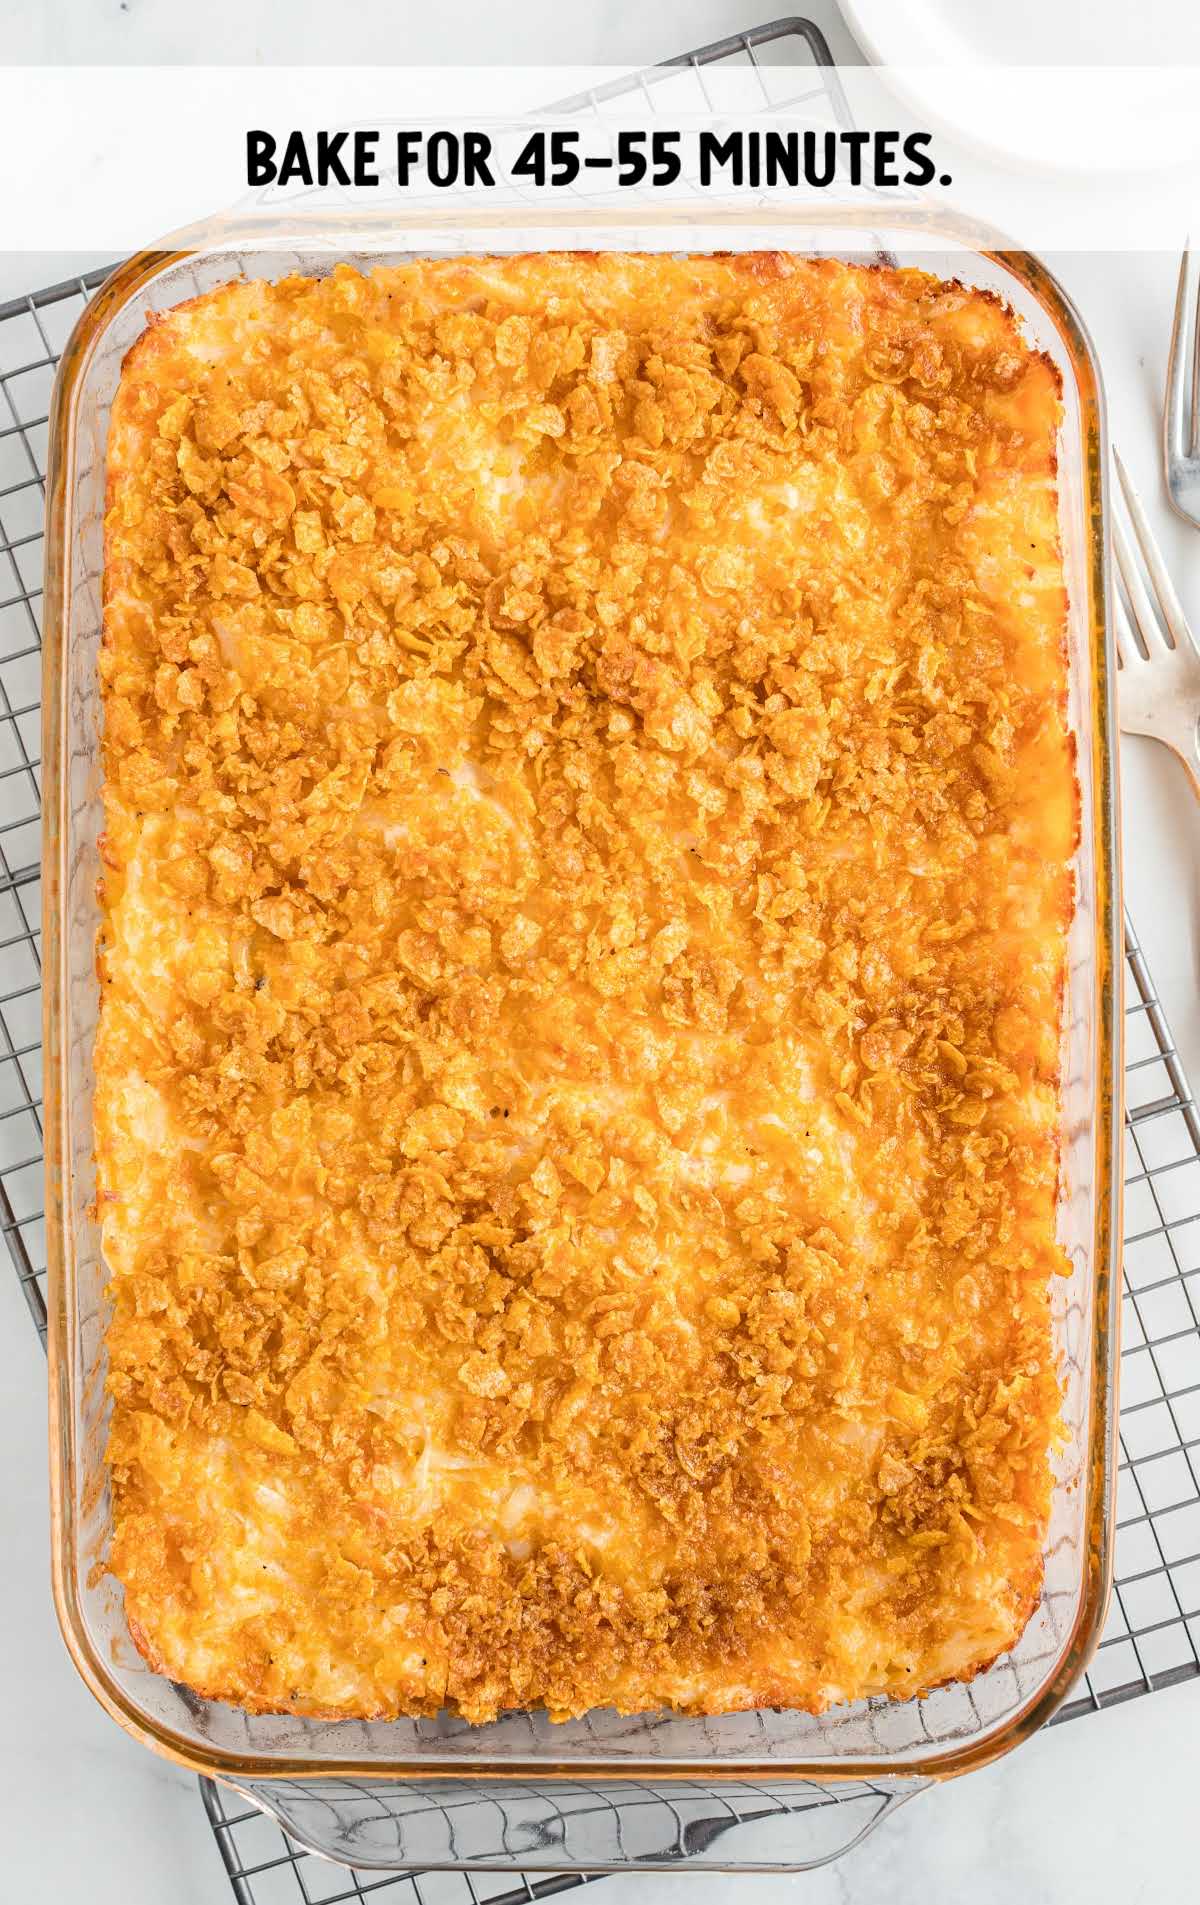 Casserole baked in a baking dish